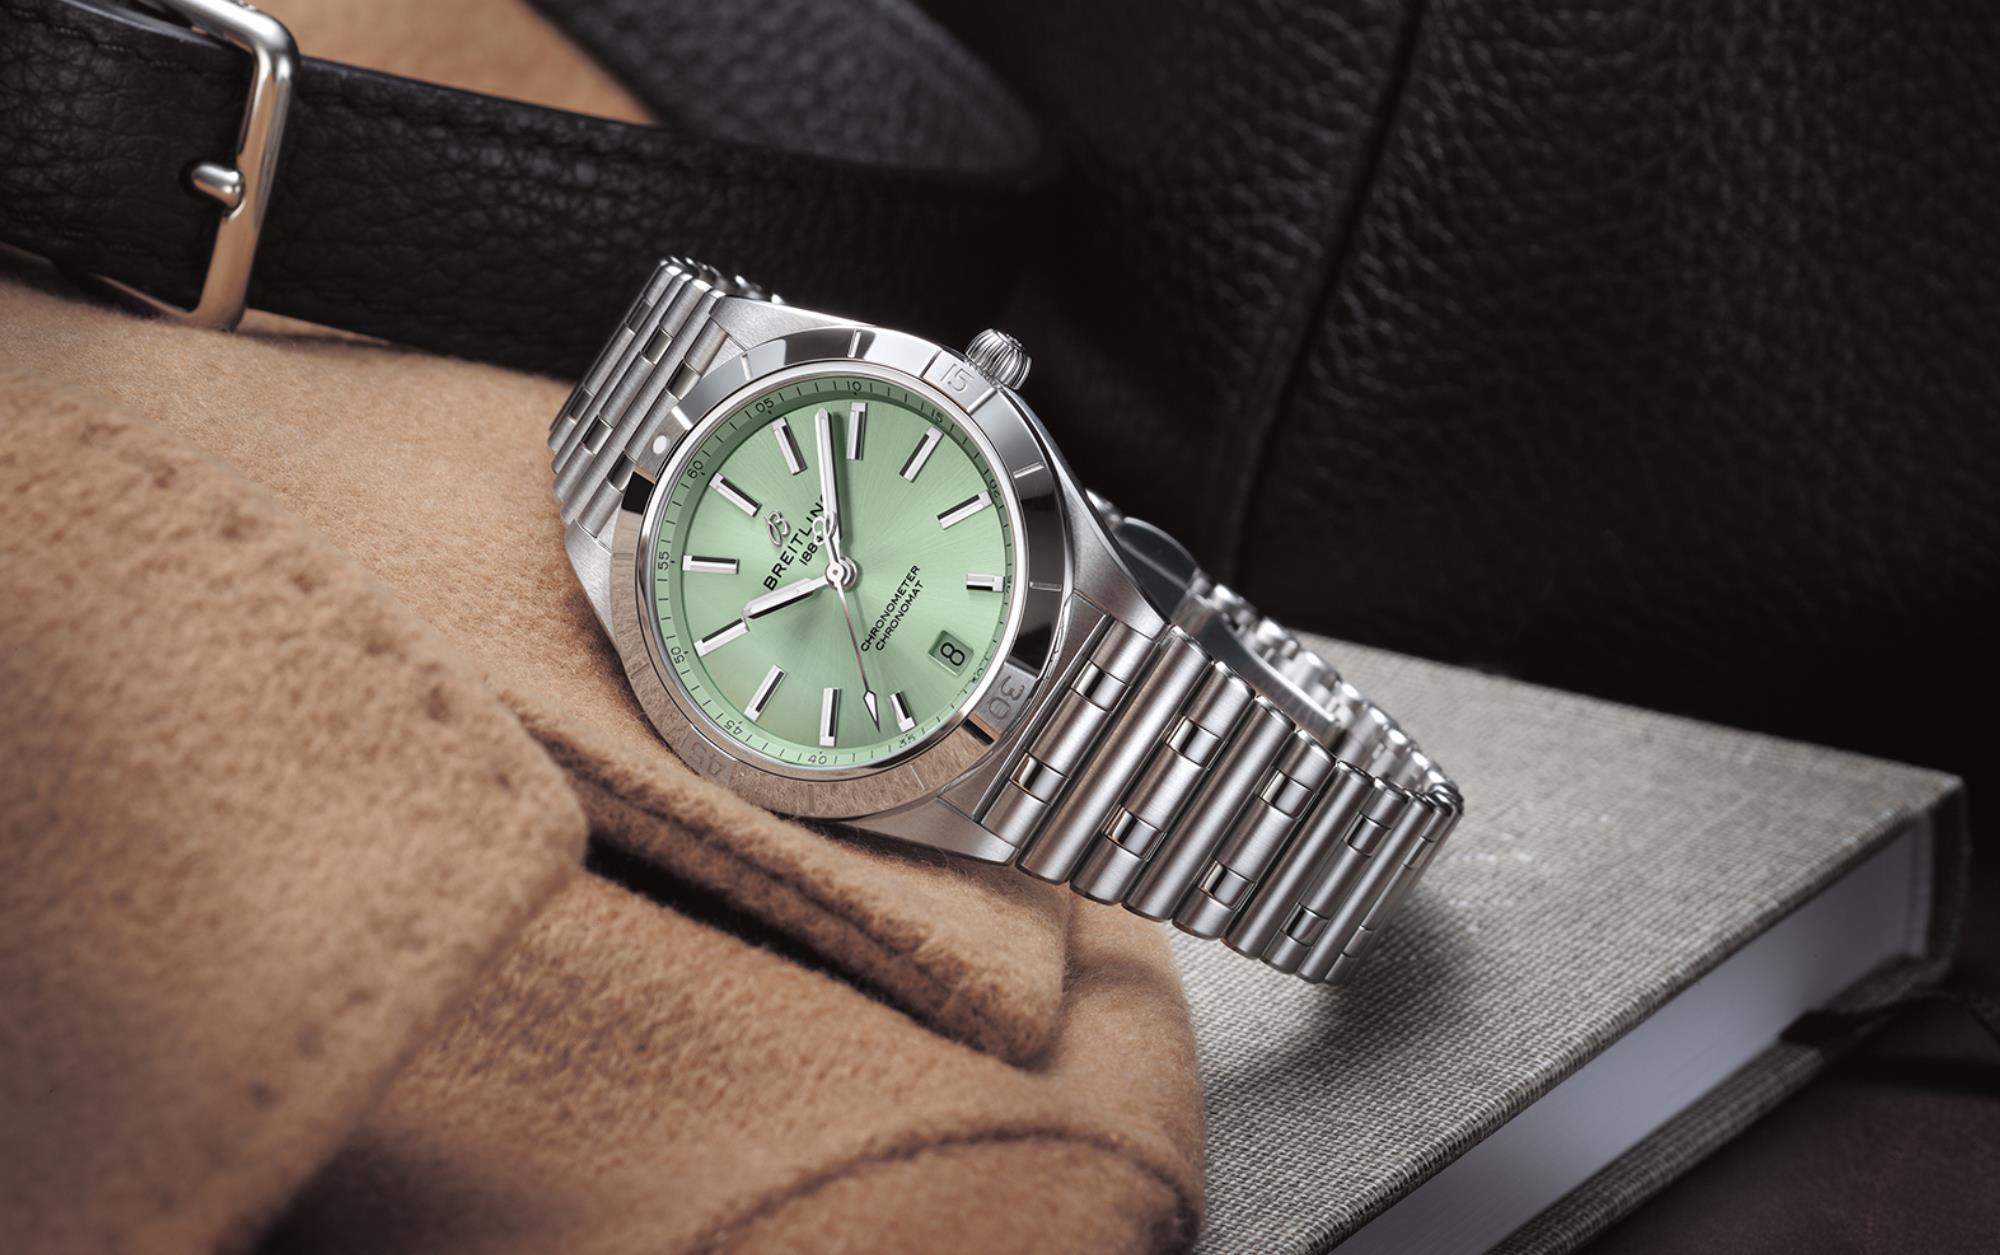 The mint green dial fake watch has a date window.